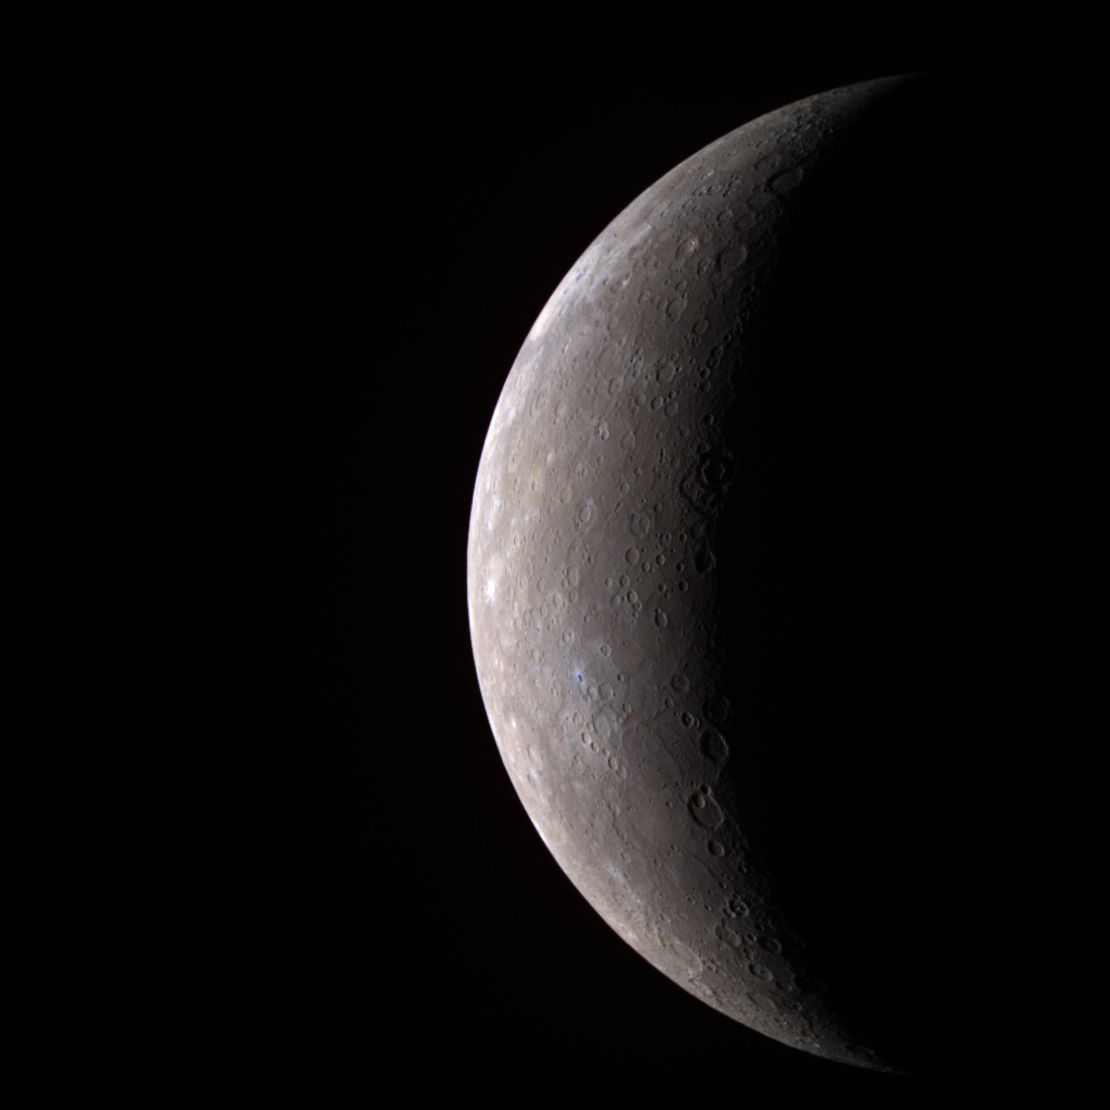 In January 2008, the MESSENGER spacecraft beamed back to Earth the first high-resolution image of Mercury by a spacecraft in over 30 years -- since the flybys of Mariner 10 in 1974 and 1975.